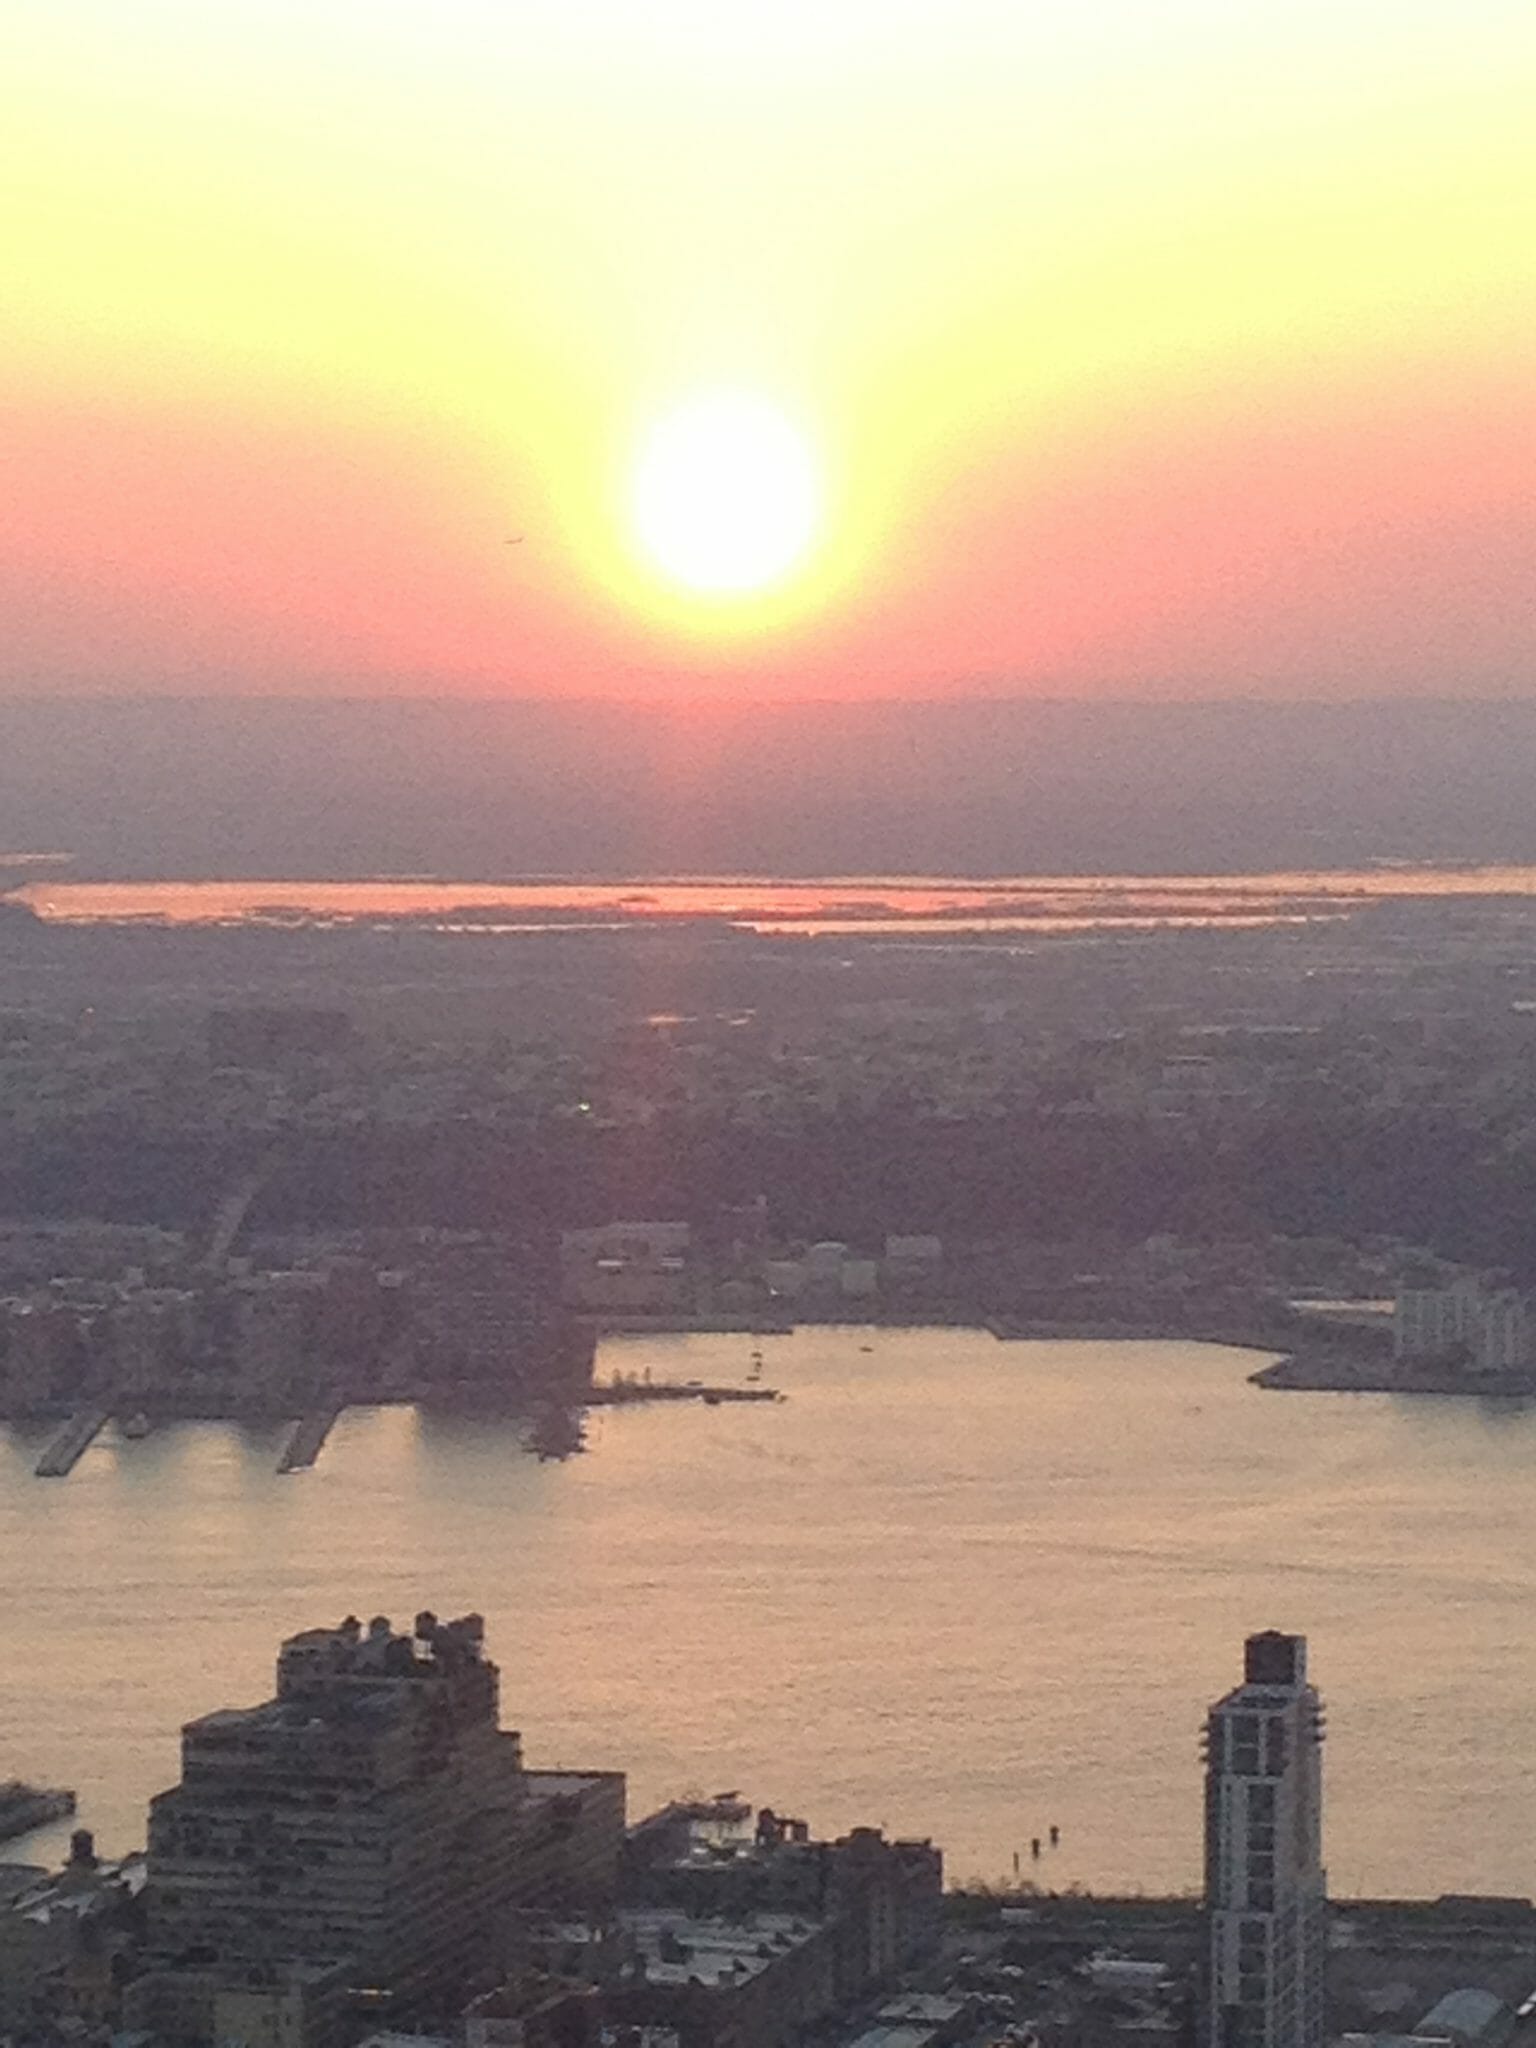 Sunset from the ESB.